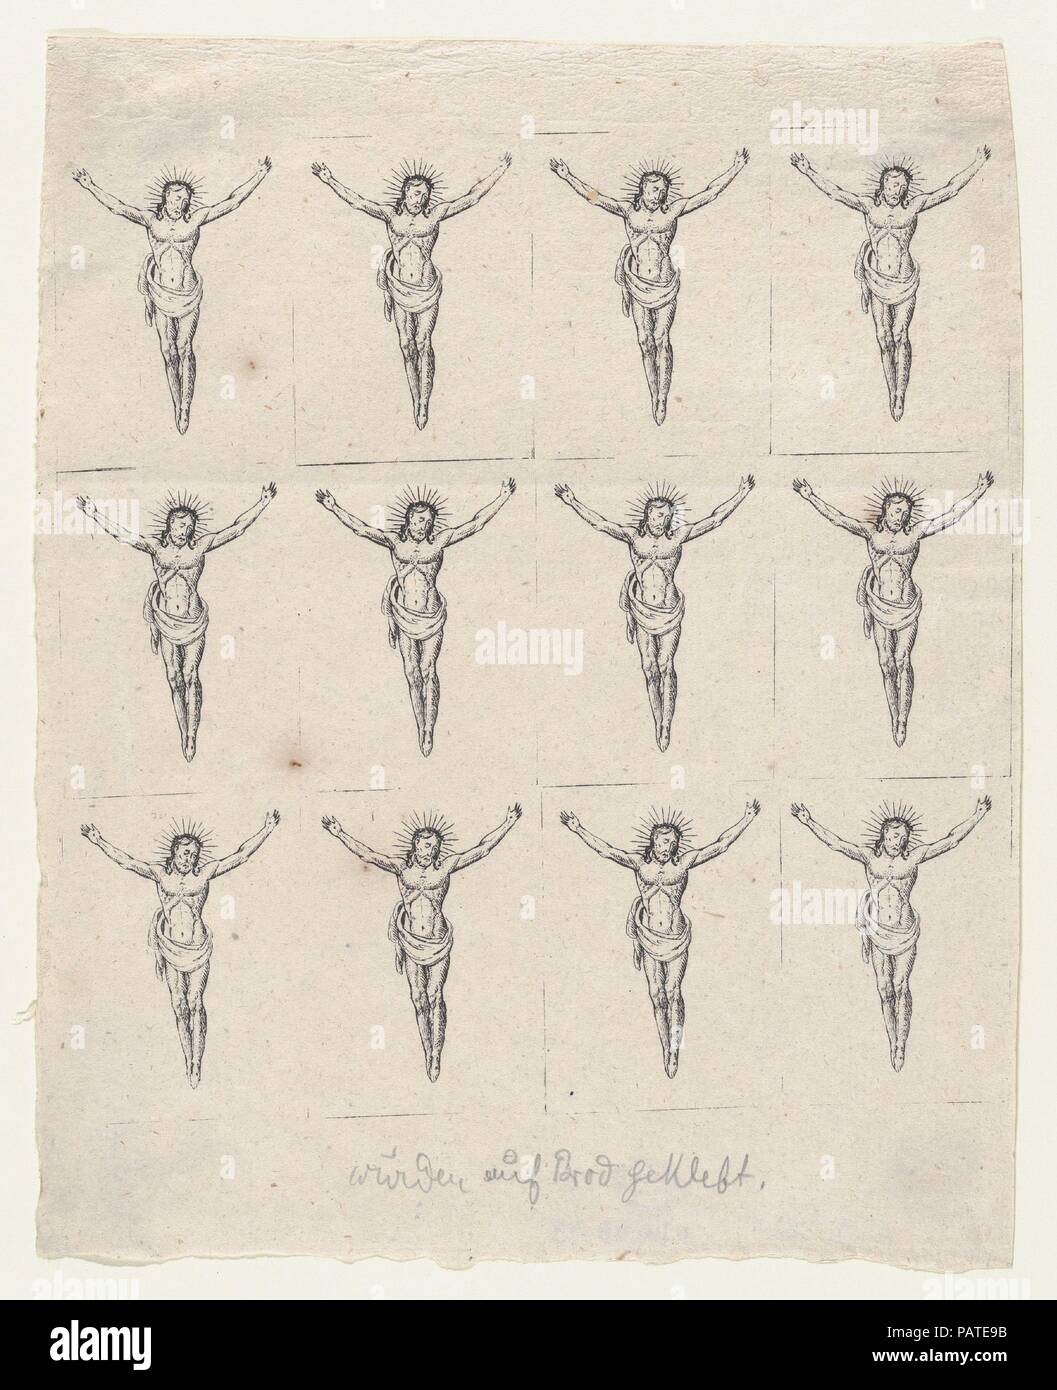 Sheet of Twelve Crucified Christs. Artist: Anonymous, German, 19th century. Dimensions: Sheet: 8 11/16 × 6 7/8 in. (22 × 17.5 cm). Date: 19th century.  This sheet of crucified Christs was meant to be cut into individual pieces and attached to wafers and swallowed for sickness. Museum: Metropolitan Museum of Art, New York, USA. Stock Photo